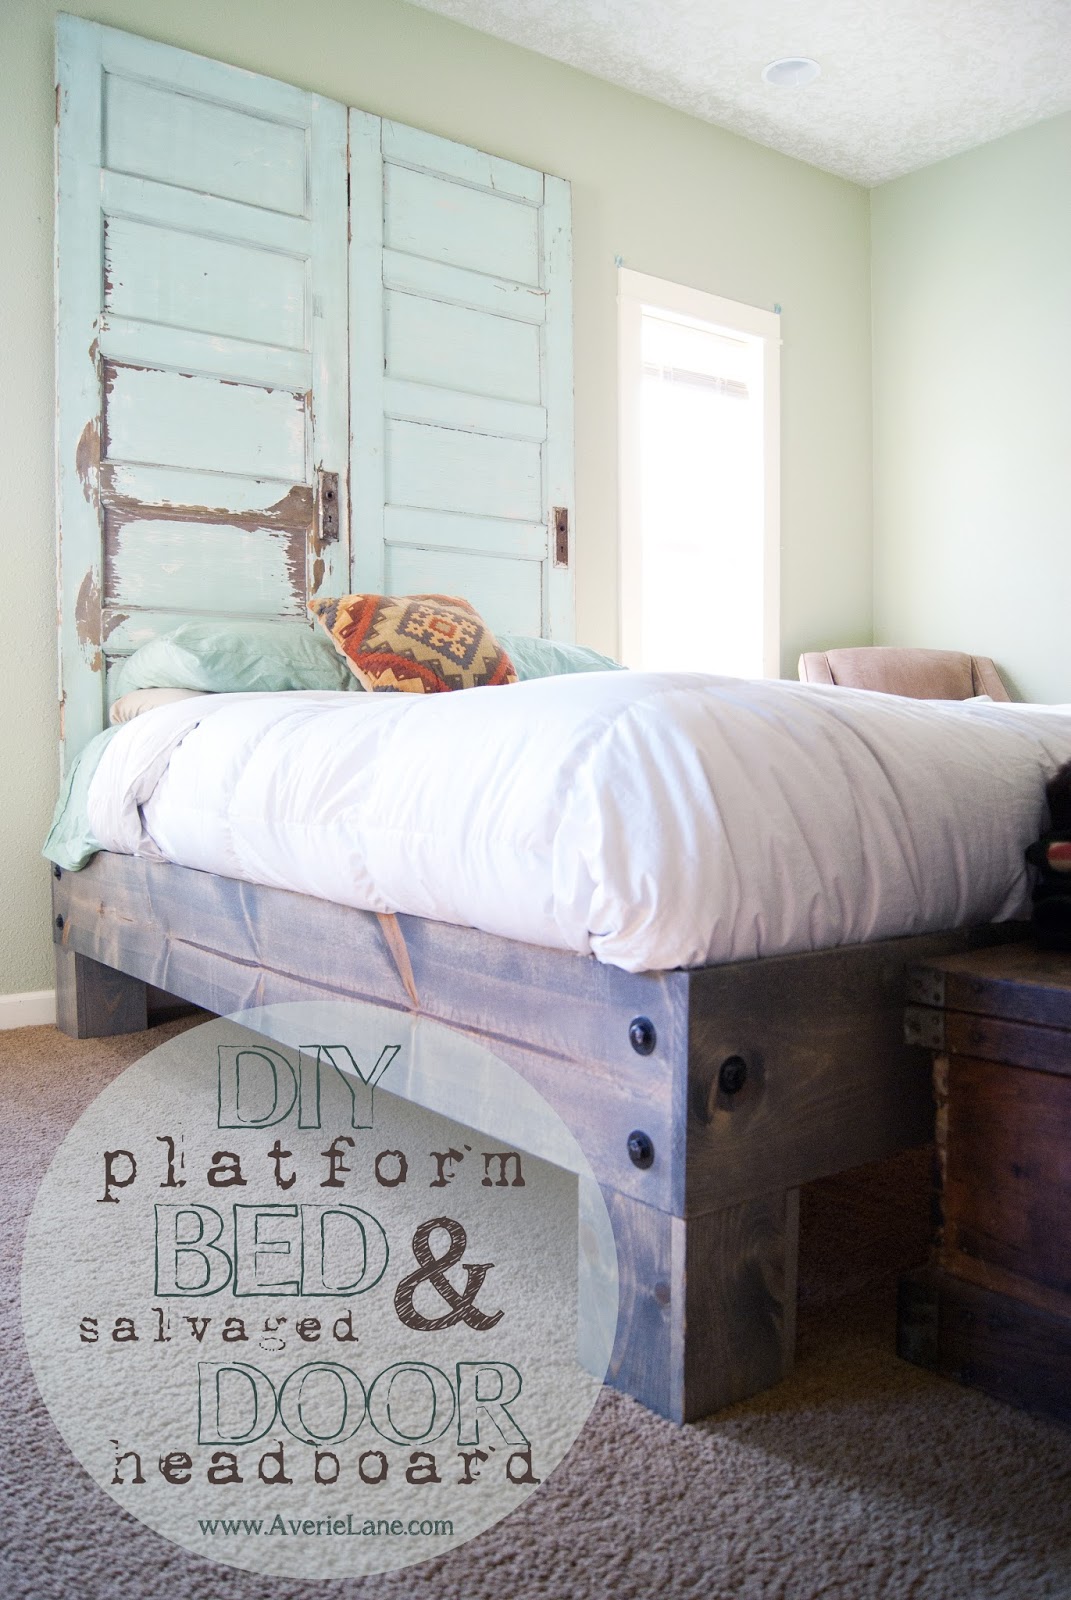 how to build a platform bed